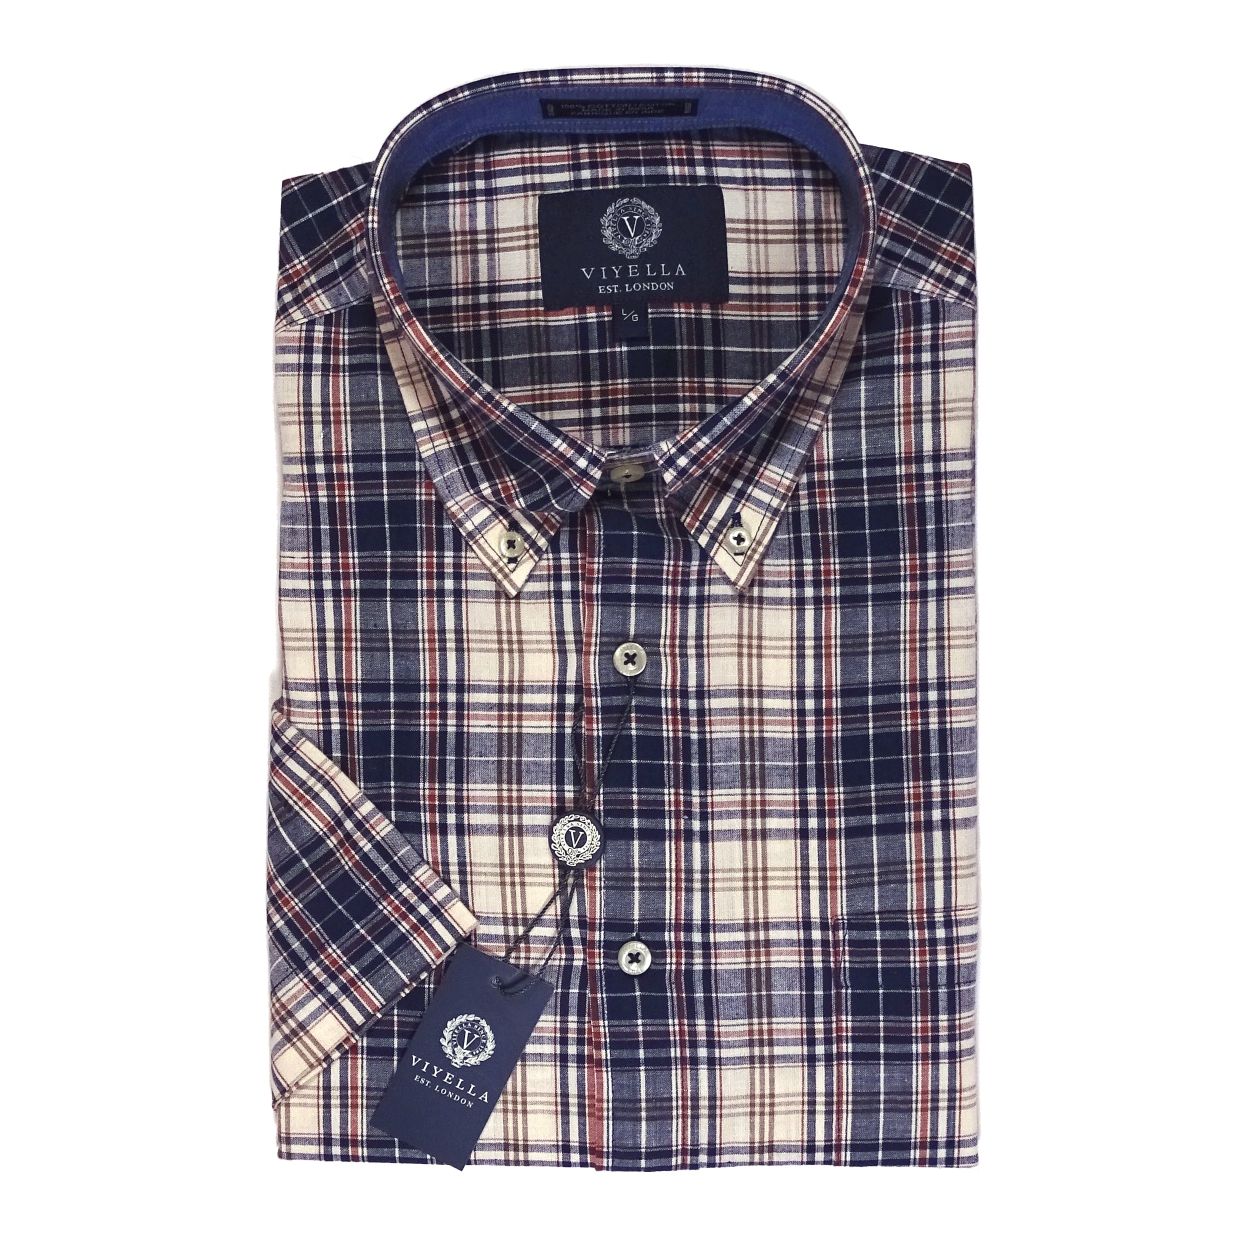 Cotton Madras Short Sleeve Cotton Sport Shirt in Navy and Latte Plaid (Size Large) by Viyella